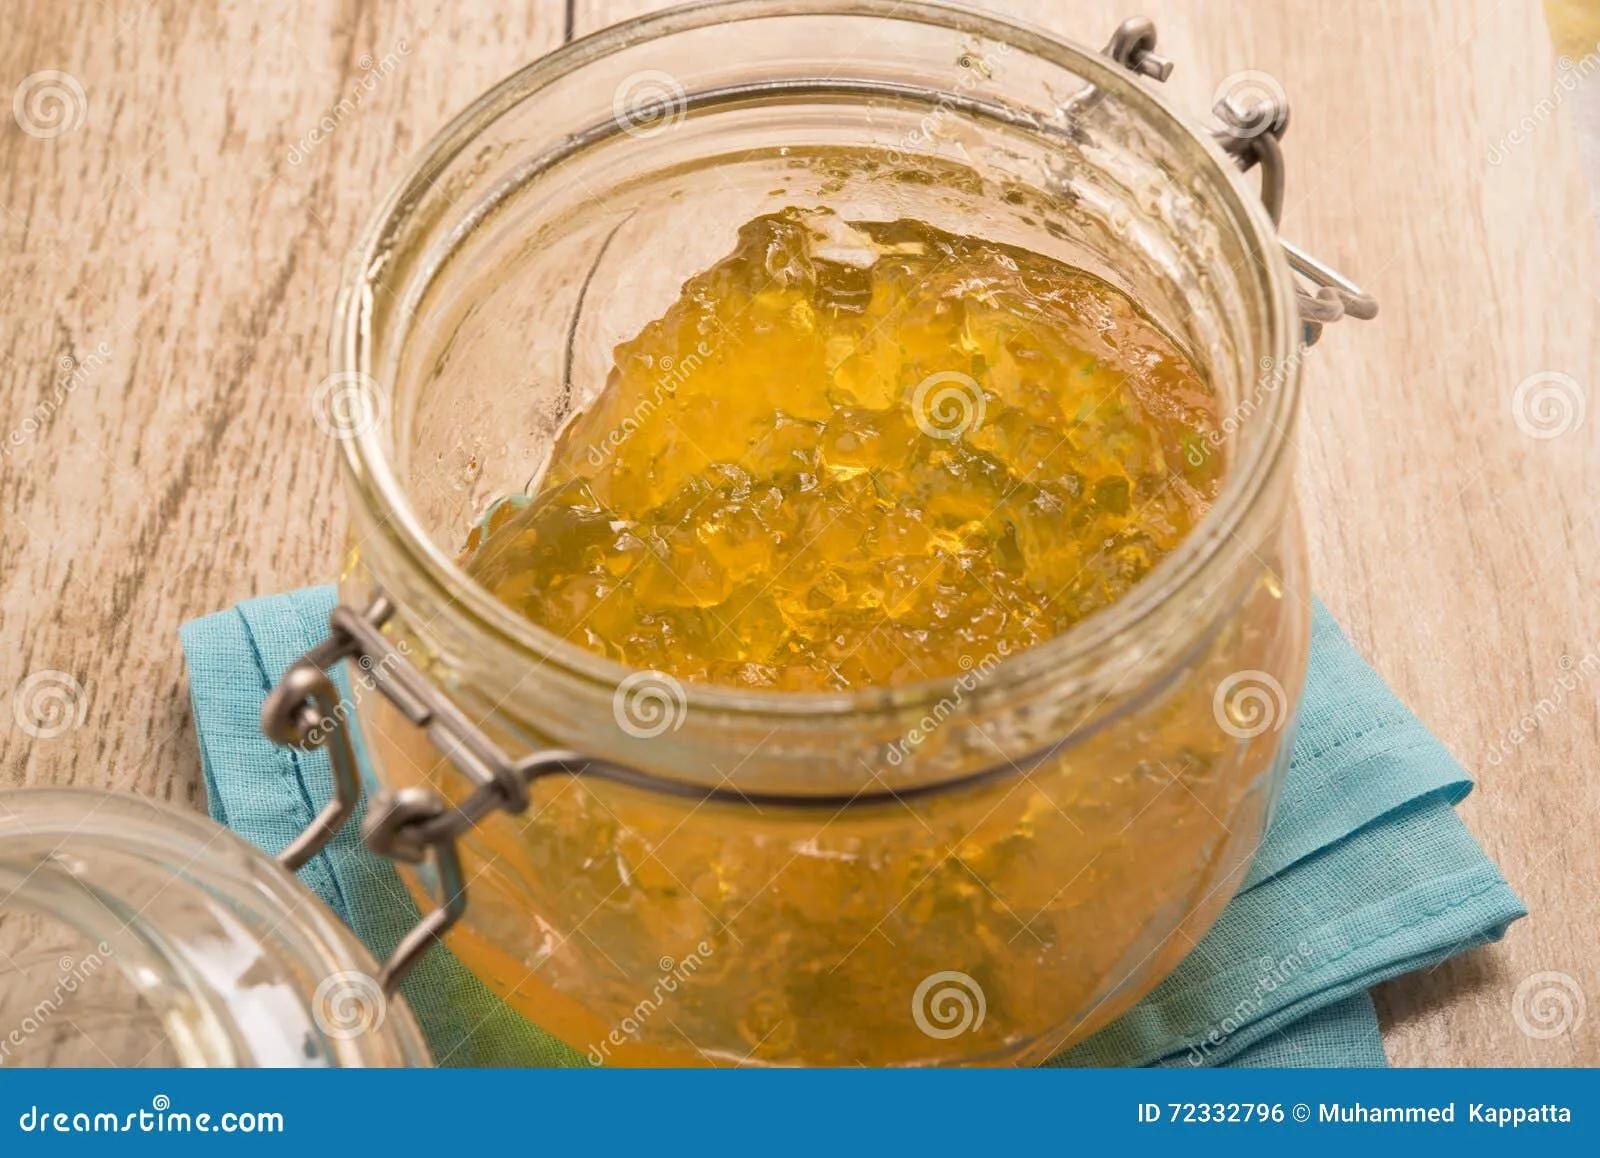 Marmalade Jam in a Glass Bowl. Stock Photo - Image of food, cloth: 72332796